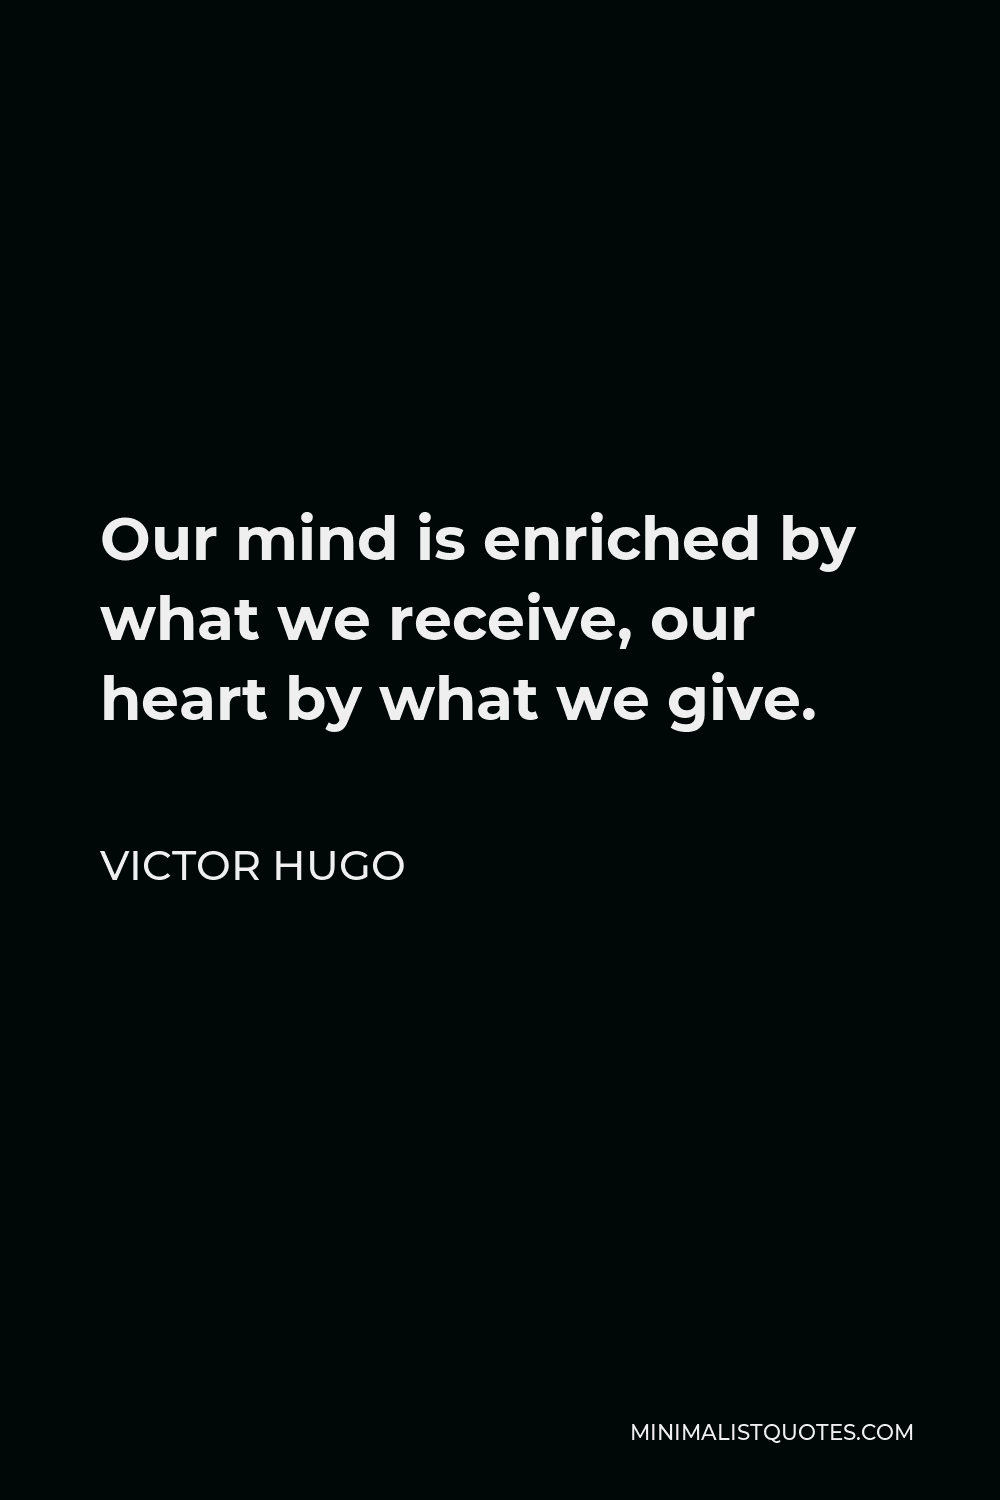 Victor Hugo Quote - Our mind is enriched by what we receive, our heart by what we give.